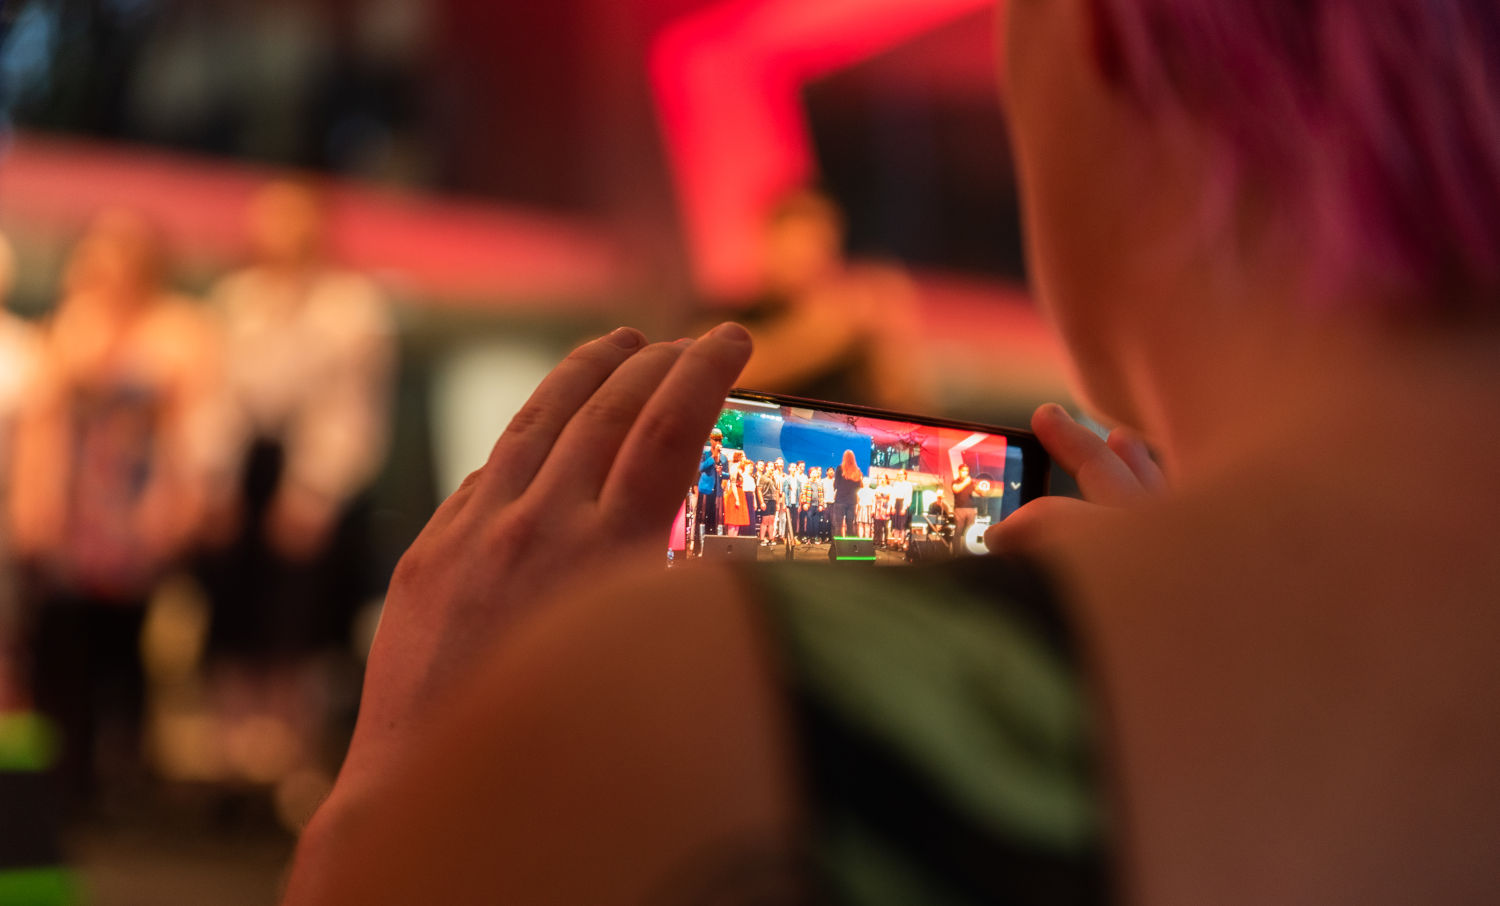 Person taking a photo on their phone of performers on stage - only the phone is in focus